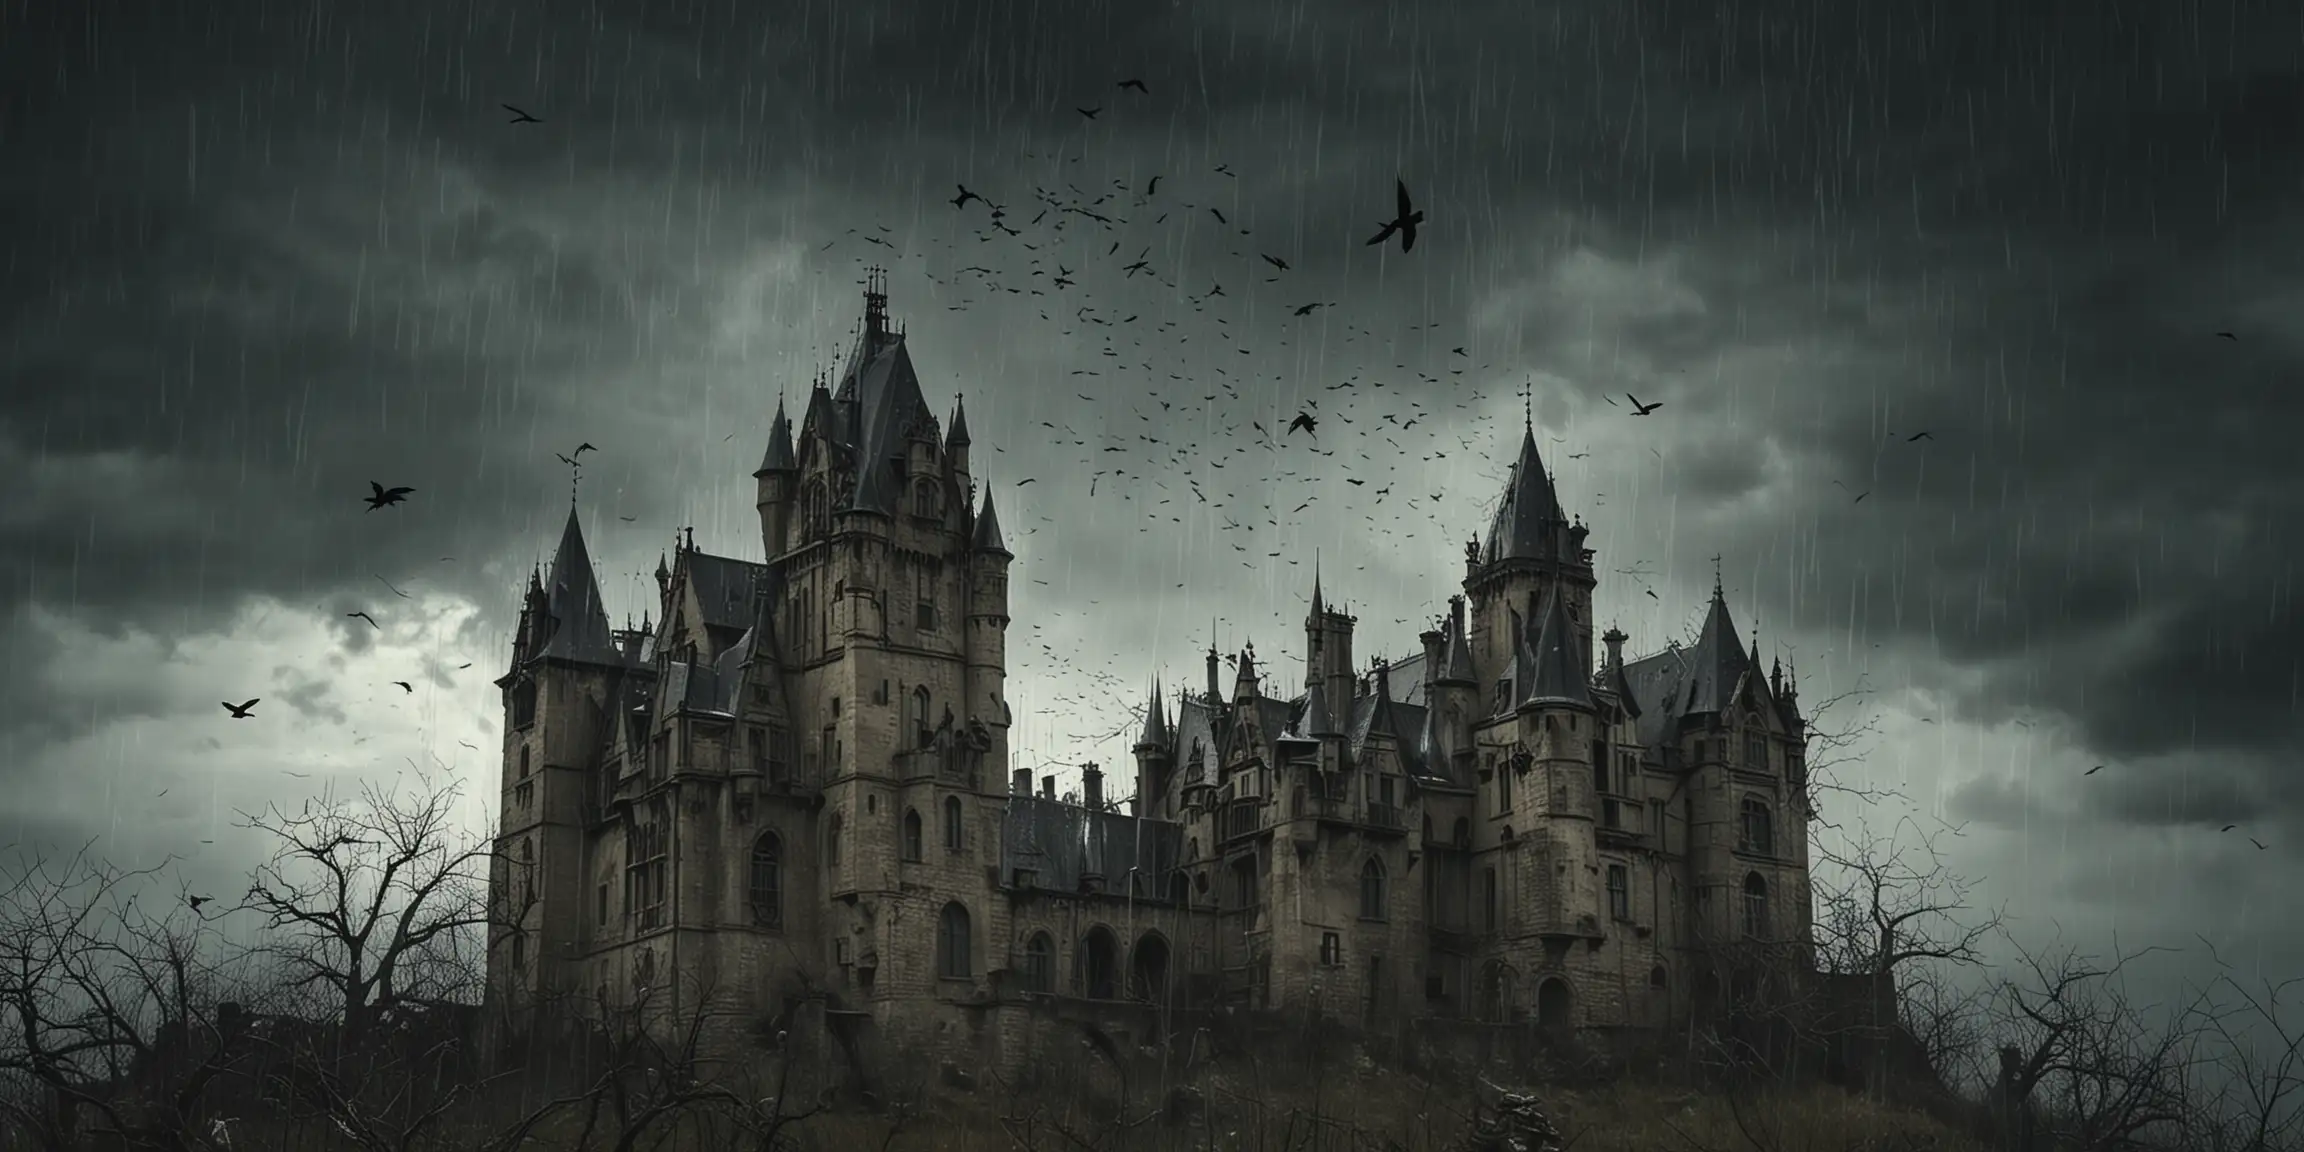 Raining, storm, Crows, cobwebs, old, breaking, gothic castle, 